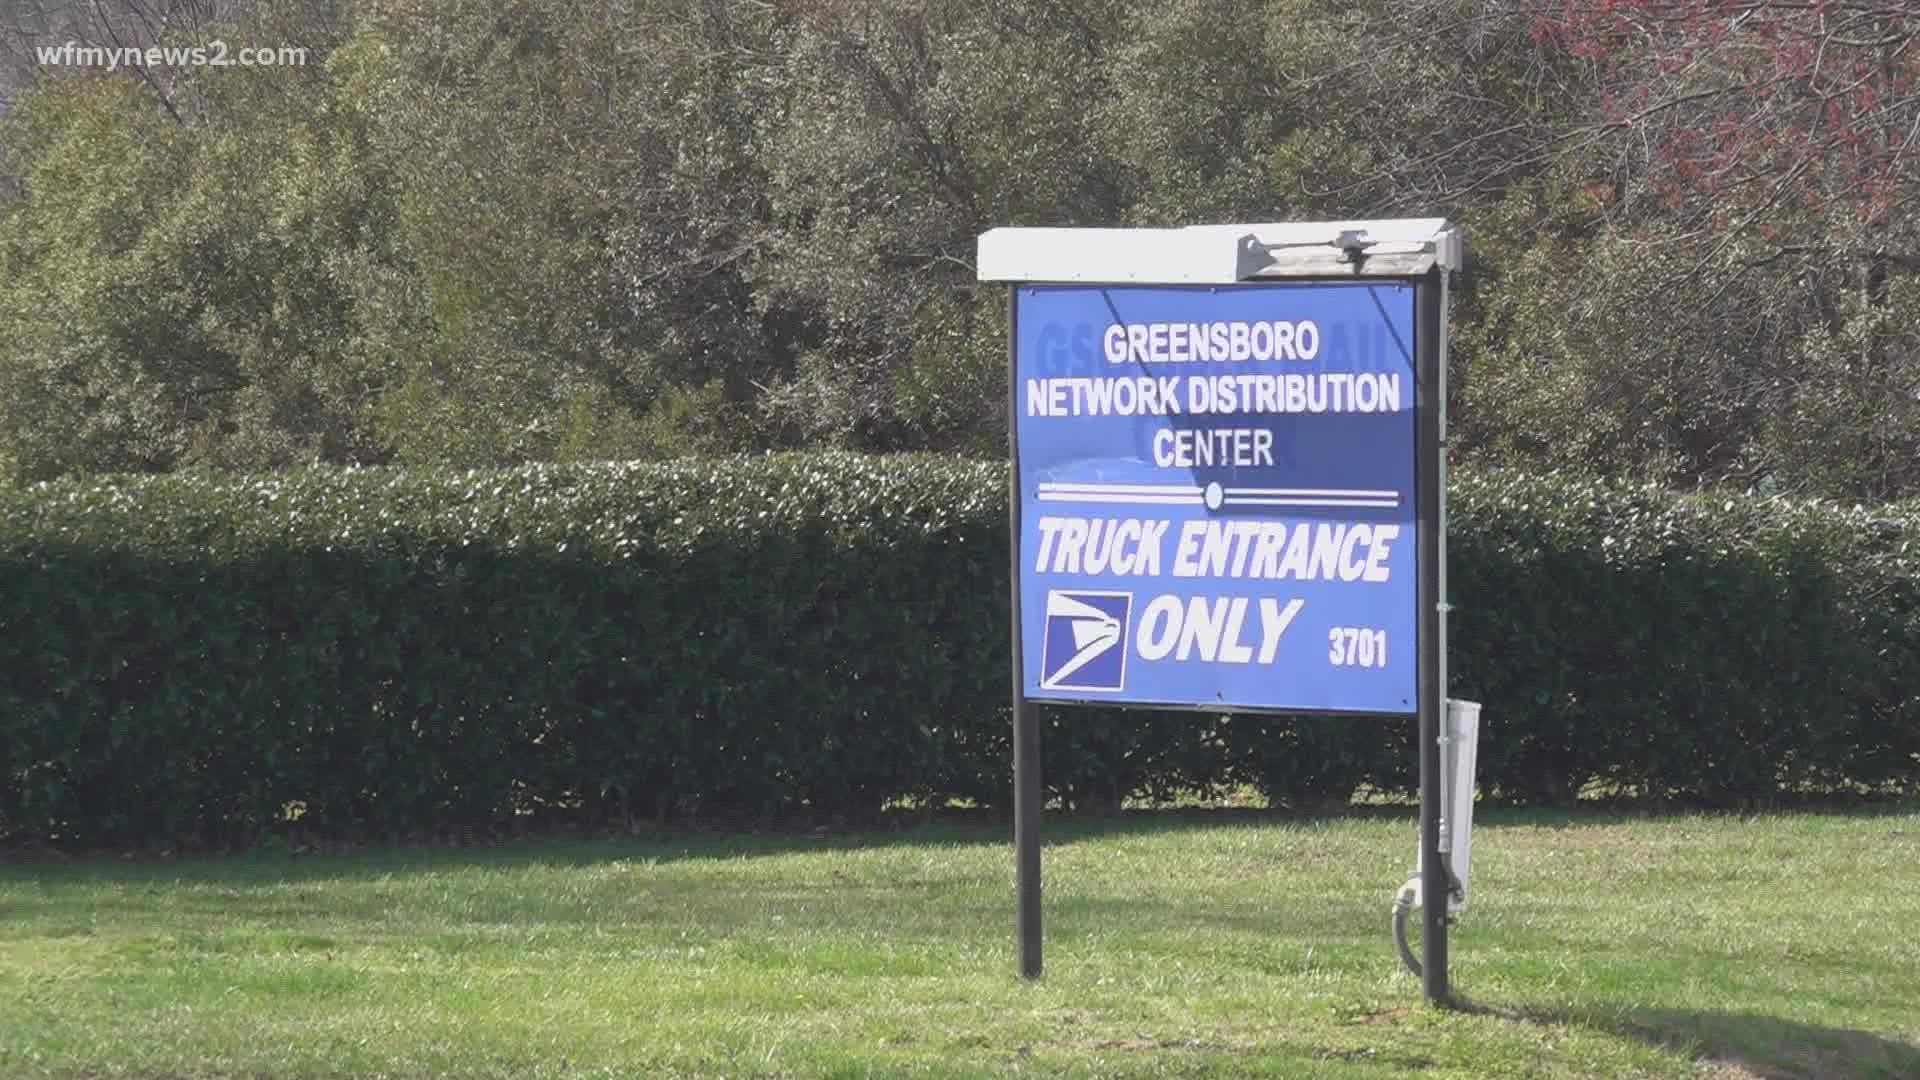 OSHA started an investigation. They reported USPS had several safety violations at its Greensboro distribution center.